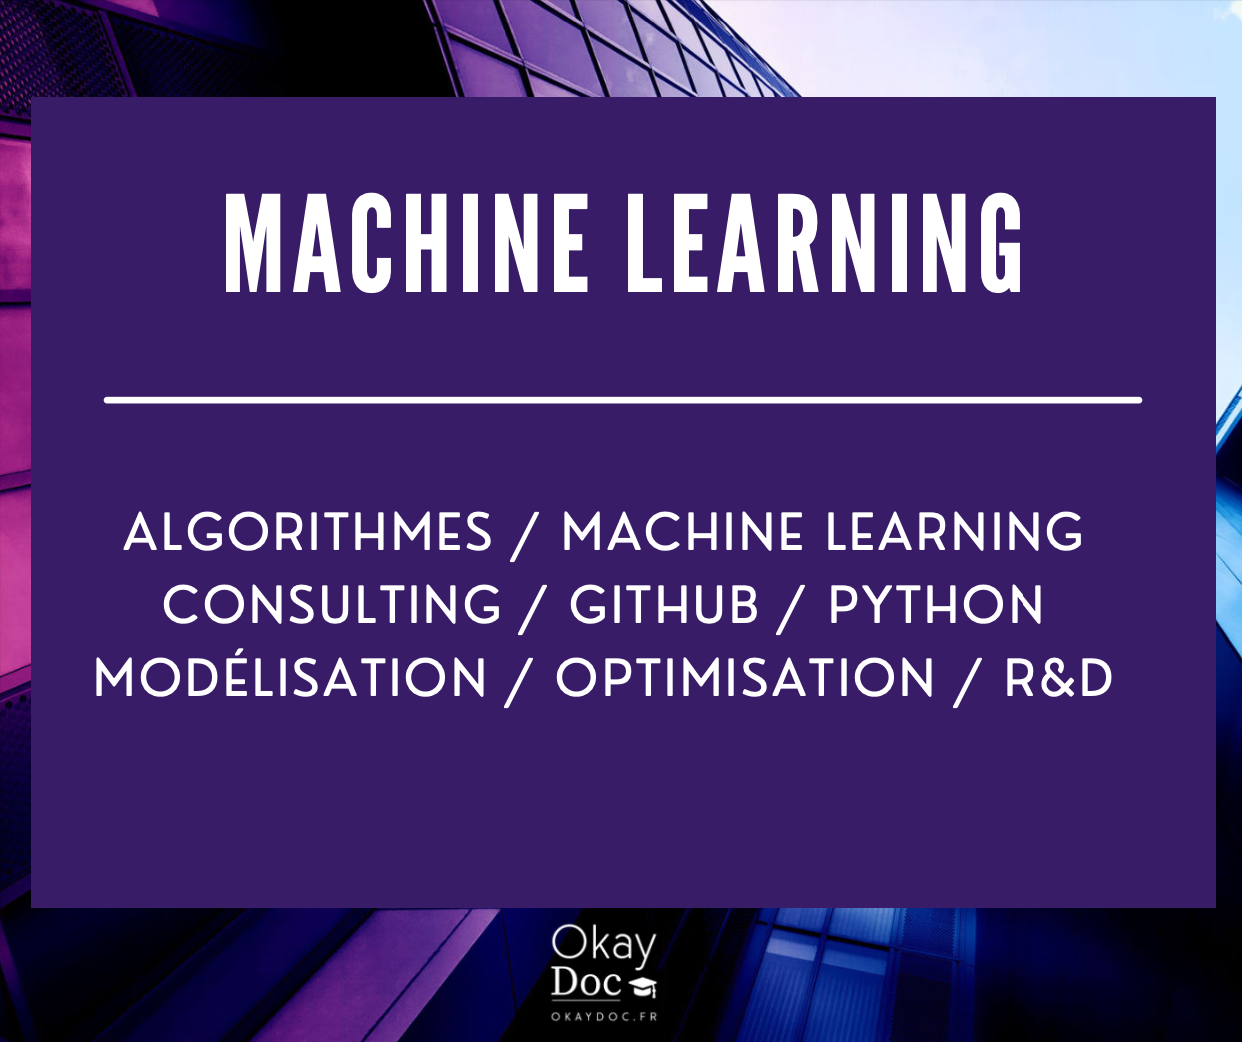 CIFRE MACHINE LEARNING